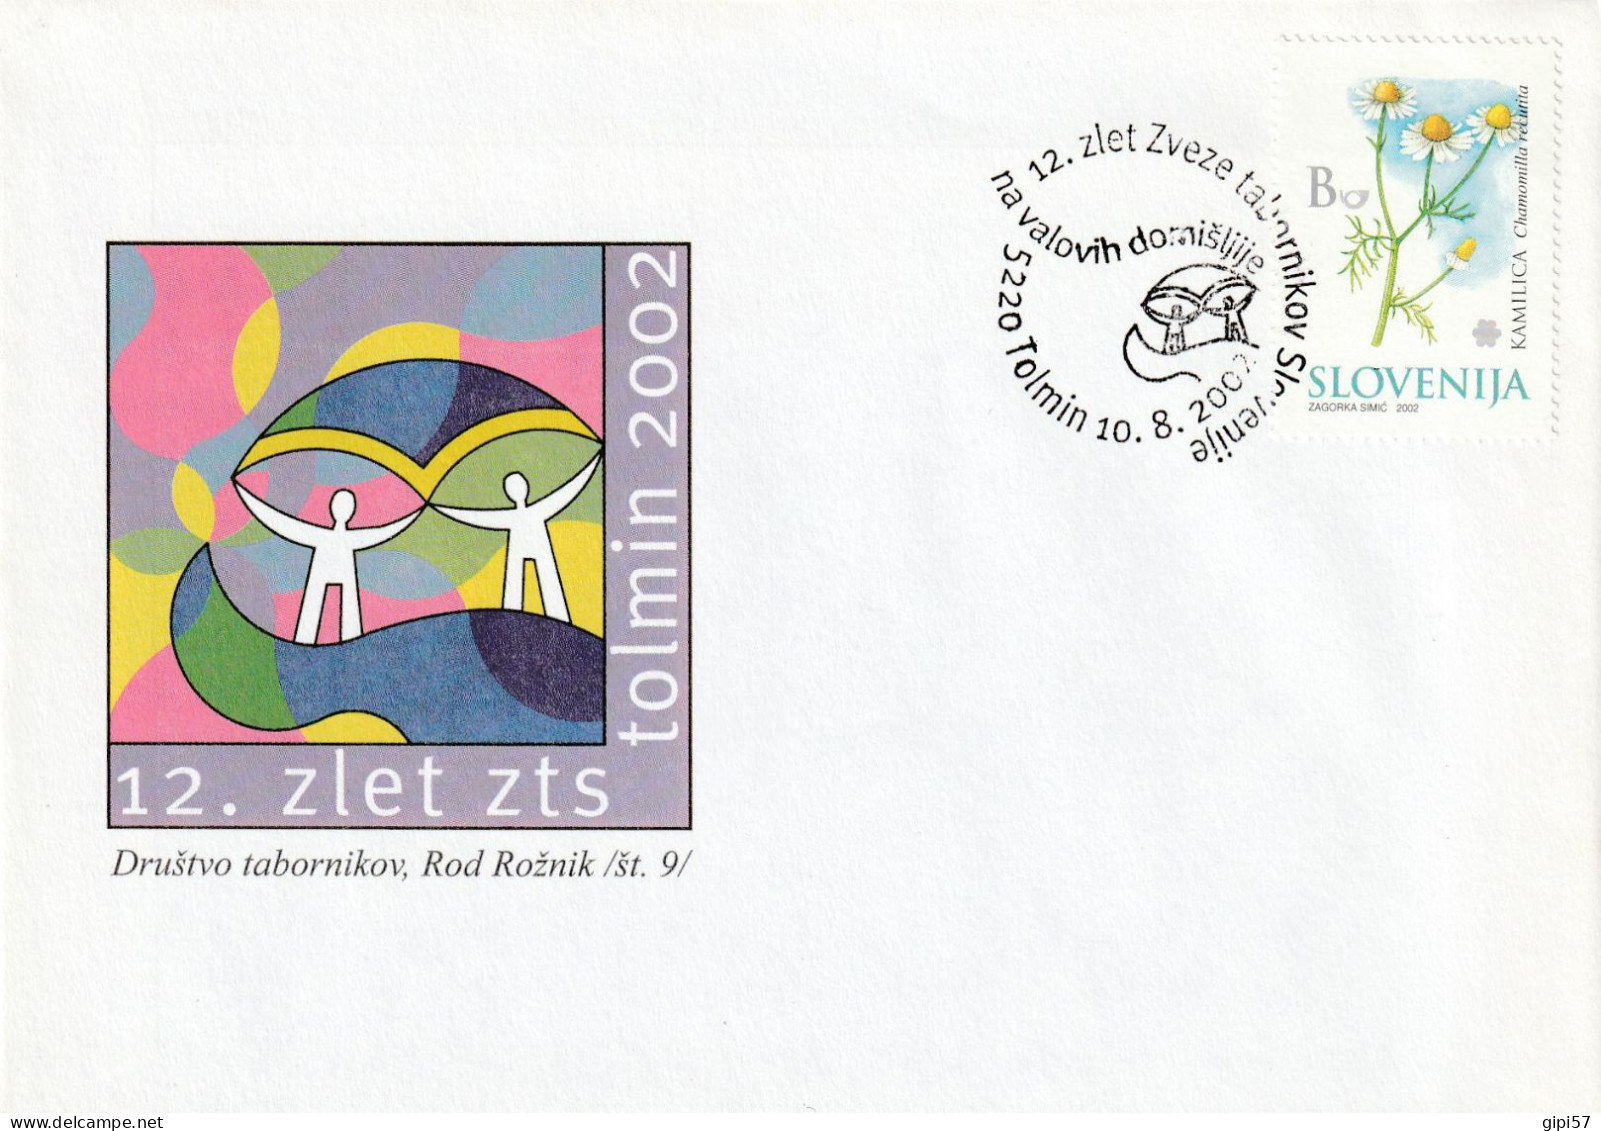 SCOUT SLOVENIA 2007 - FDC 12. FLY ON THE IMMAGINATION. SPECIAL CANCEL TOLMIN - Slovenië